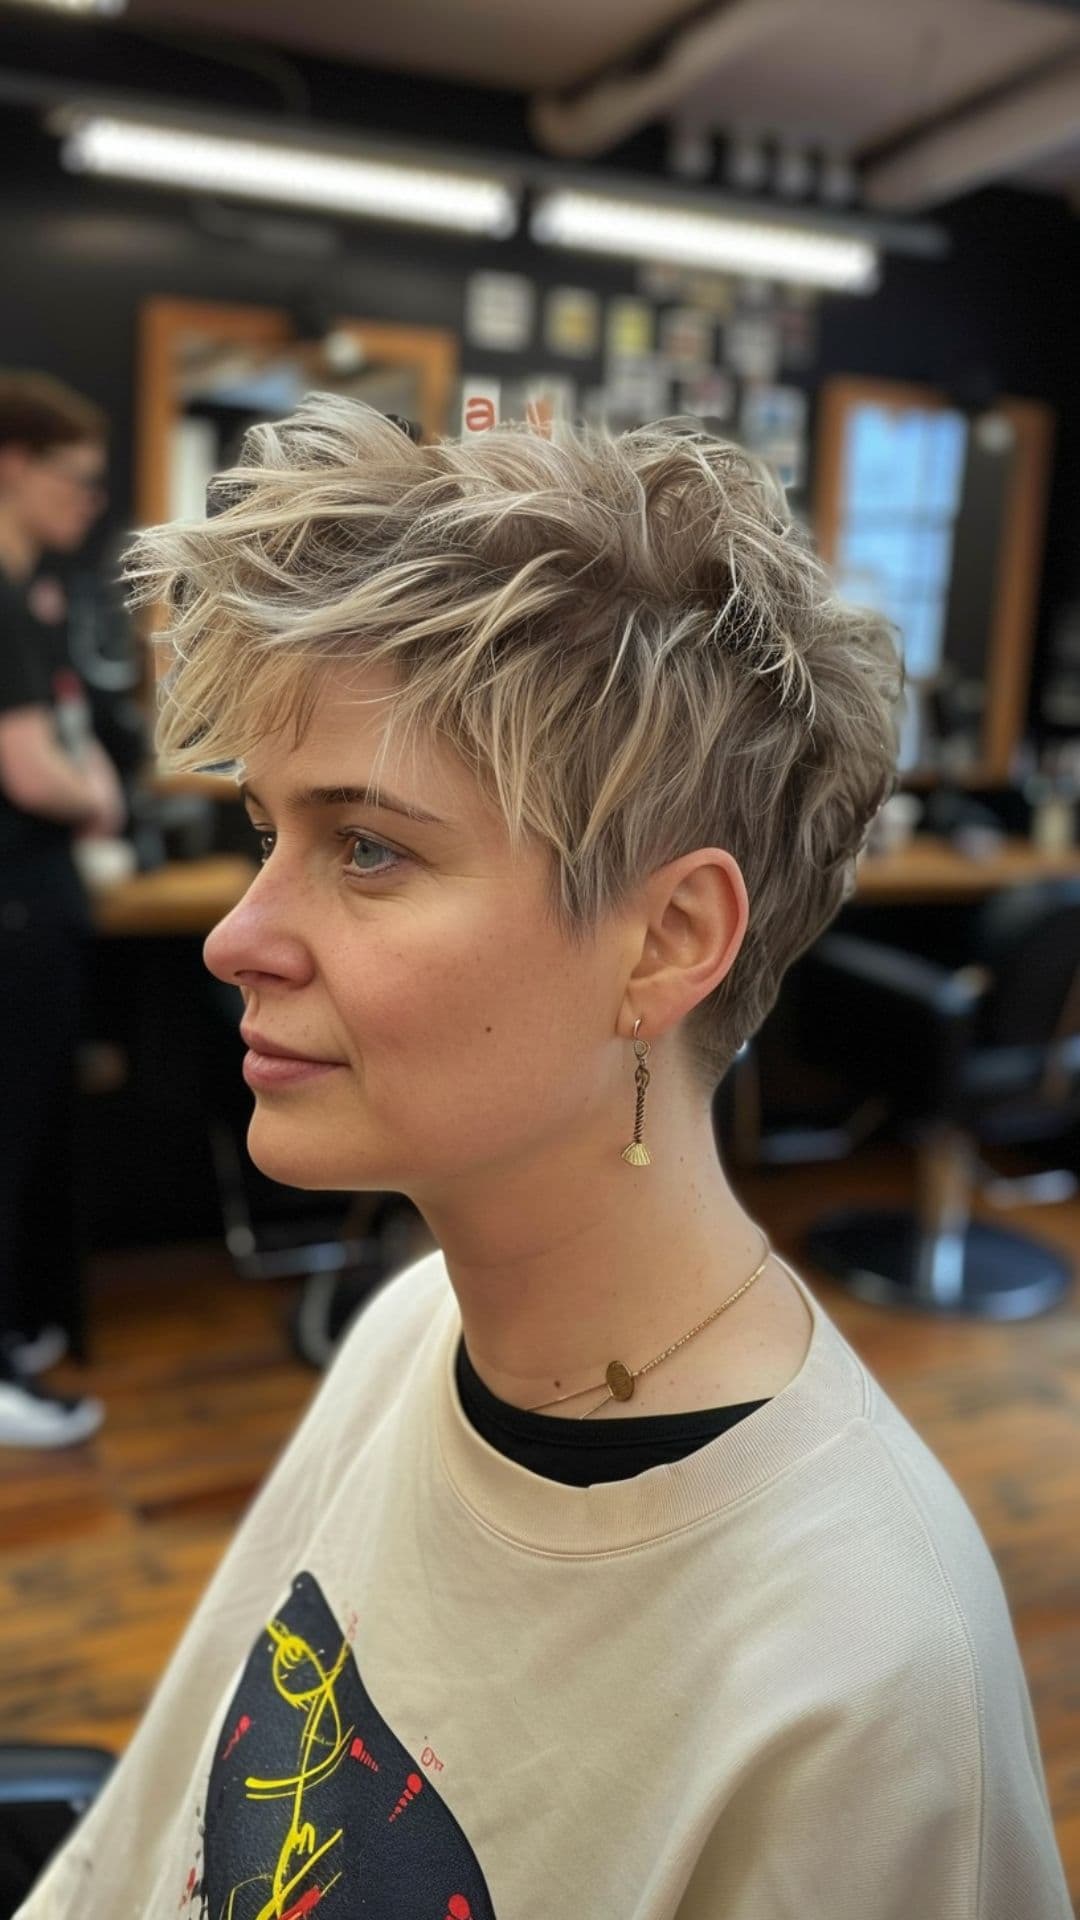 A woman modelling a spiky pixie with tousled look.